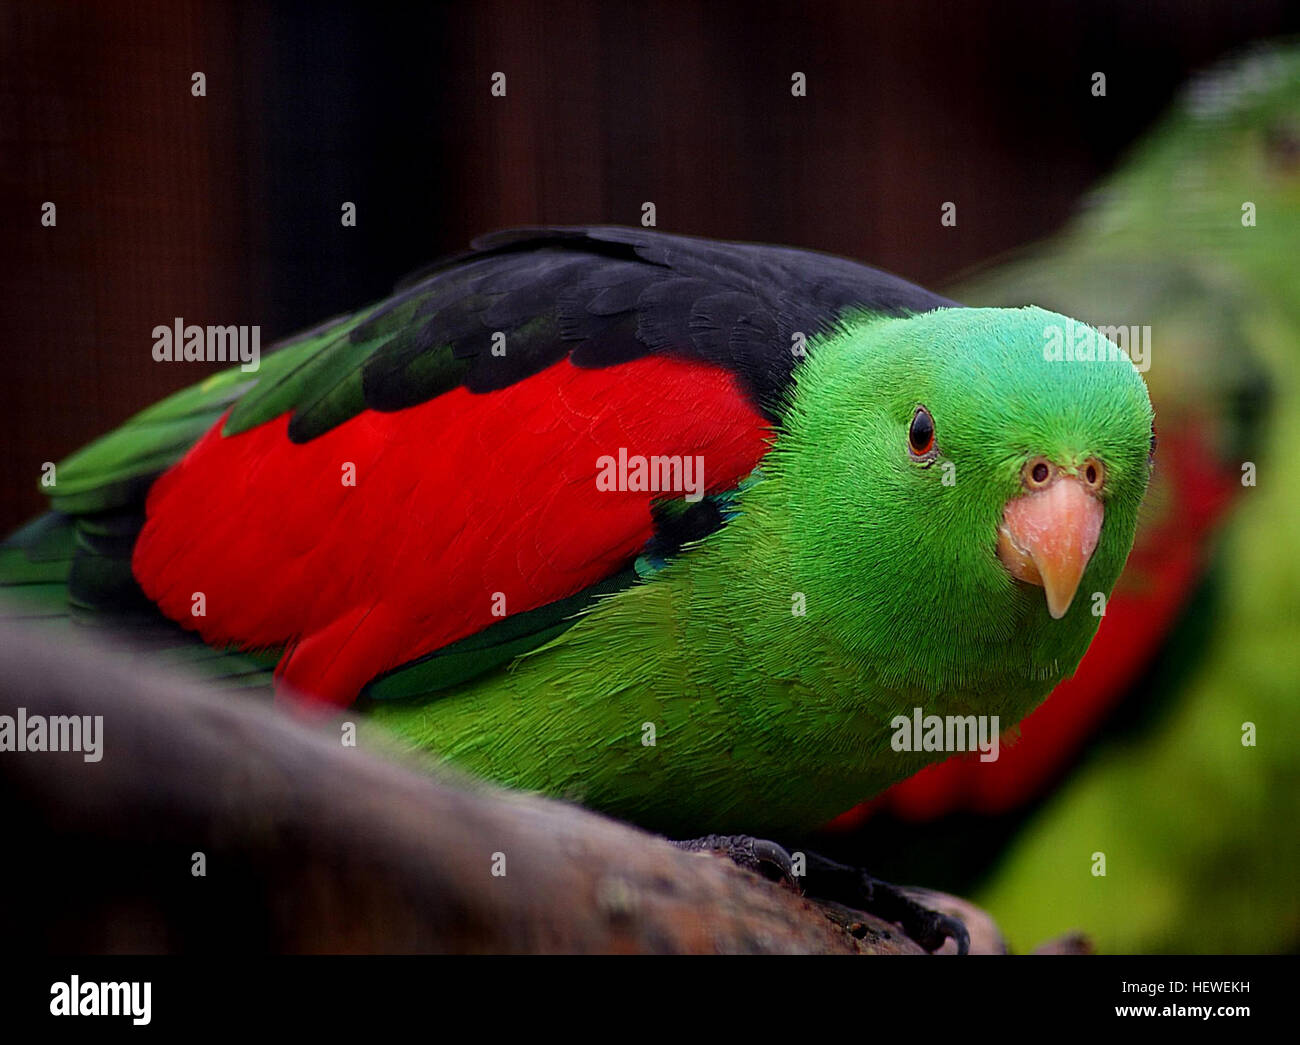 The Red-winged parrot is typically about 30 to 33 cm (12–13 in) in length. Both sexes have bright red wings and a bright green body. The male birds have a black nape, lower blue back and rump with a yellow tip on their tail, an orange bill and grey feet. The female birds on the other hand have a yellowish green body and the wings have red and pink trimmings on their wings. Also distinguishing the females are a dark iris and the lower back is a light blue colour. Juveniles have orange/yellow beaks and pale brown irises, and otherwise resemble females in colouration. Males develop adult plumage  Stock Photo